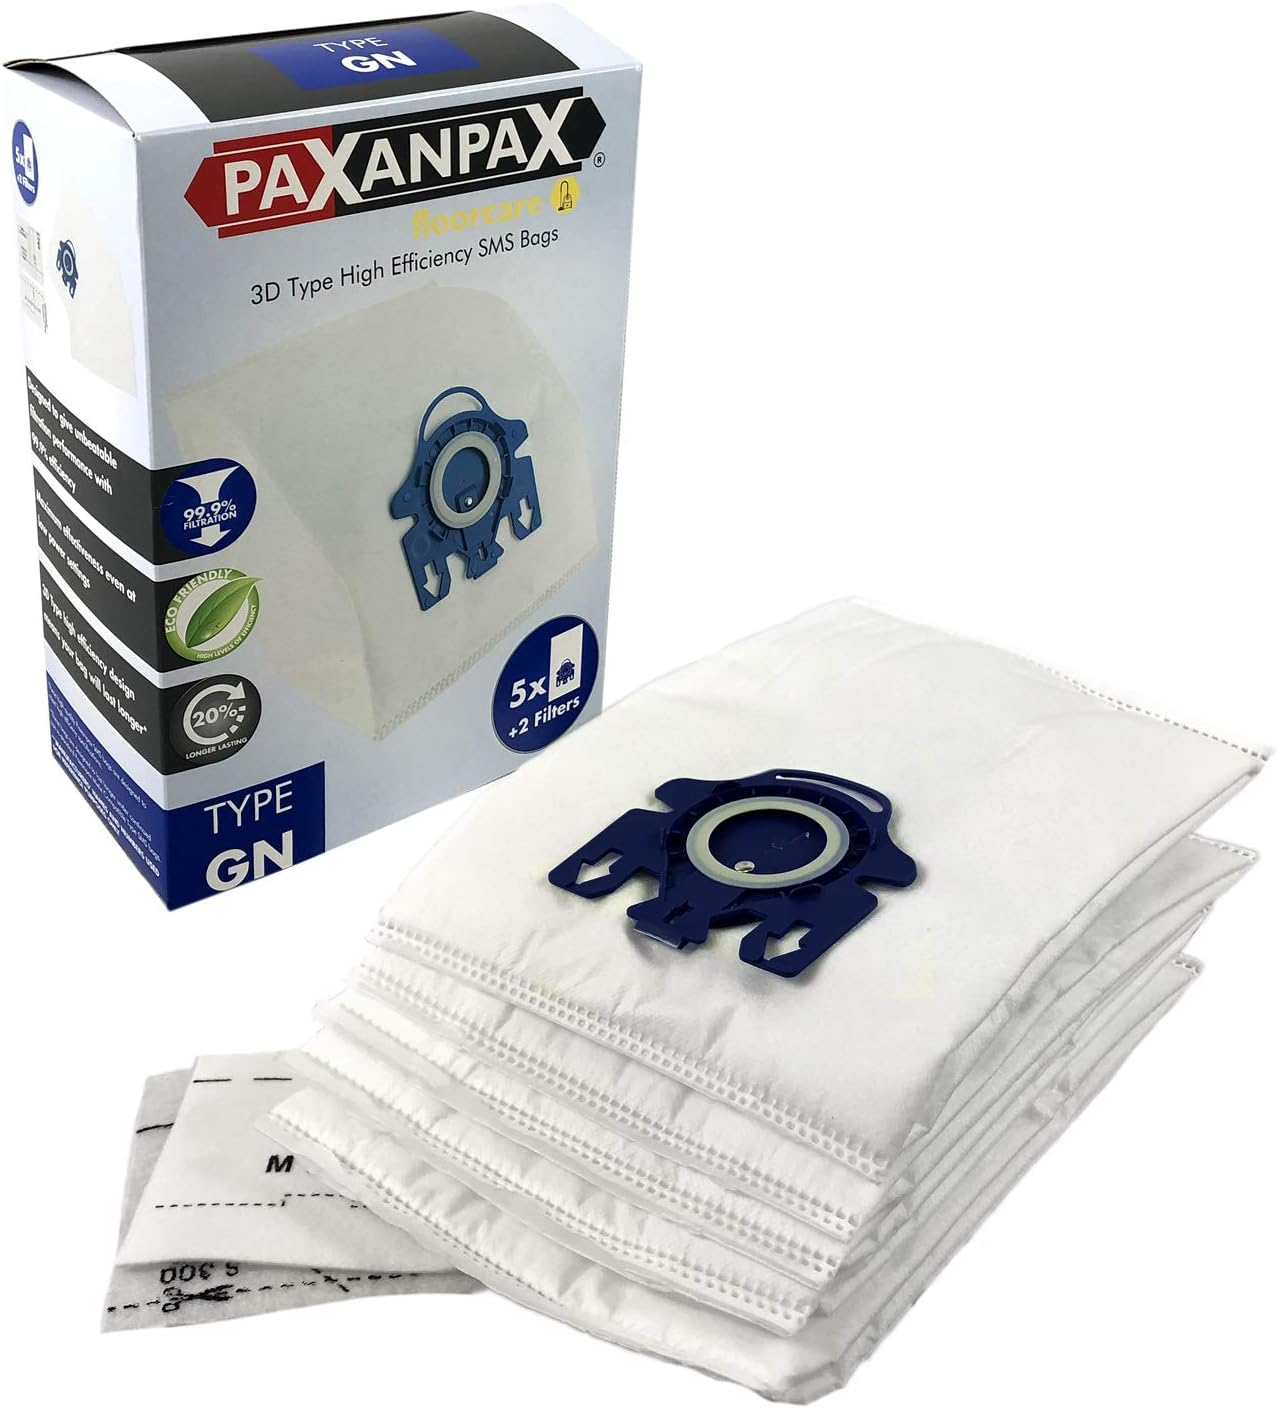 PAXANPAX VB376H3D Compatible Miele GN 3D Type SMS Vacuum Bags & Filter Kit (Pack of 5+2), Blue